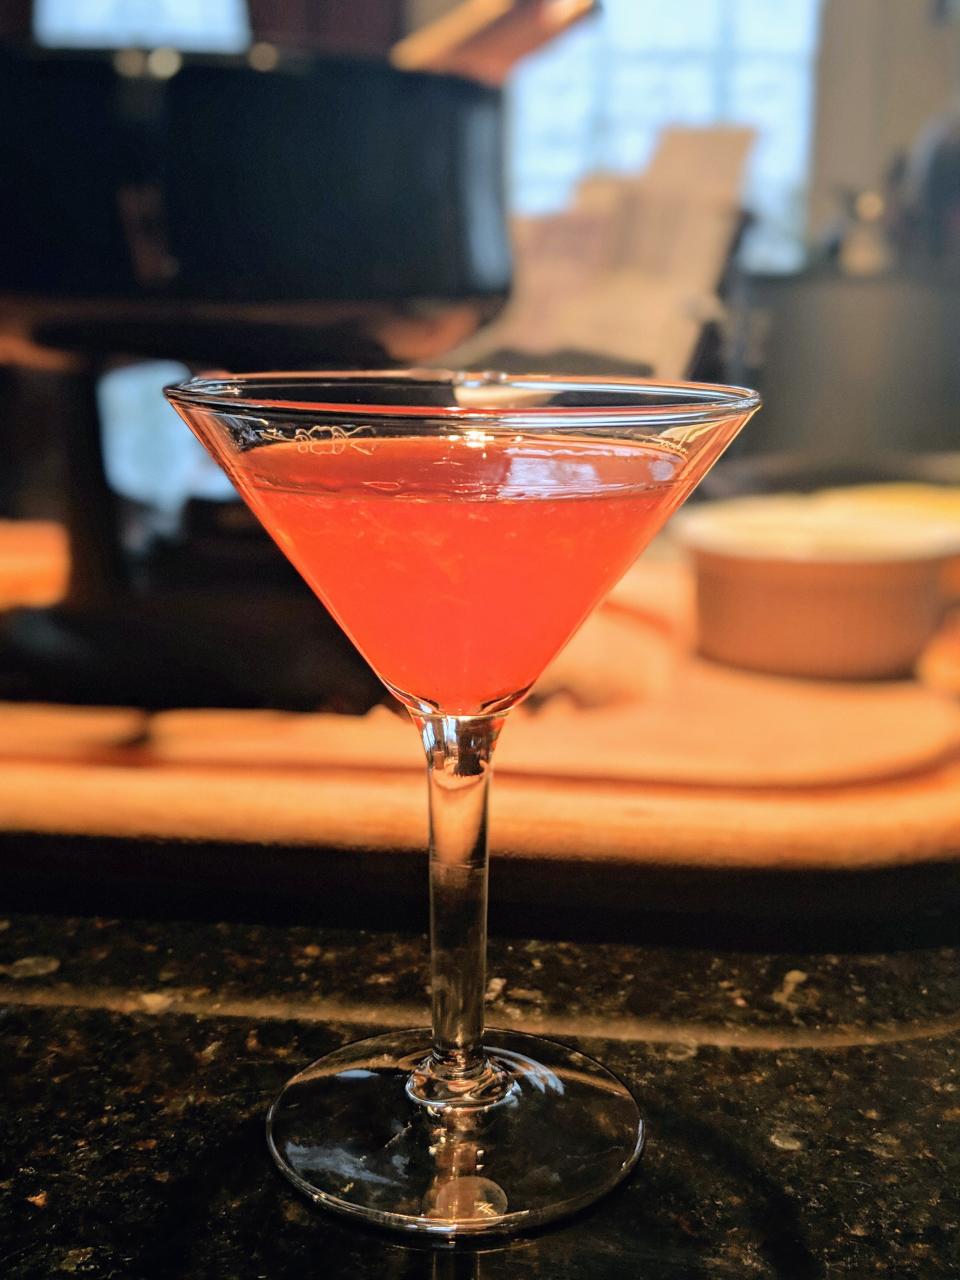 "The Paper Plane" might be the newest cocktail on the menu at Bistro Le Relais